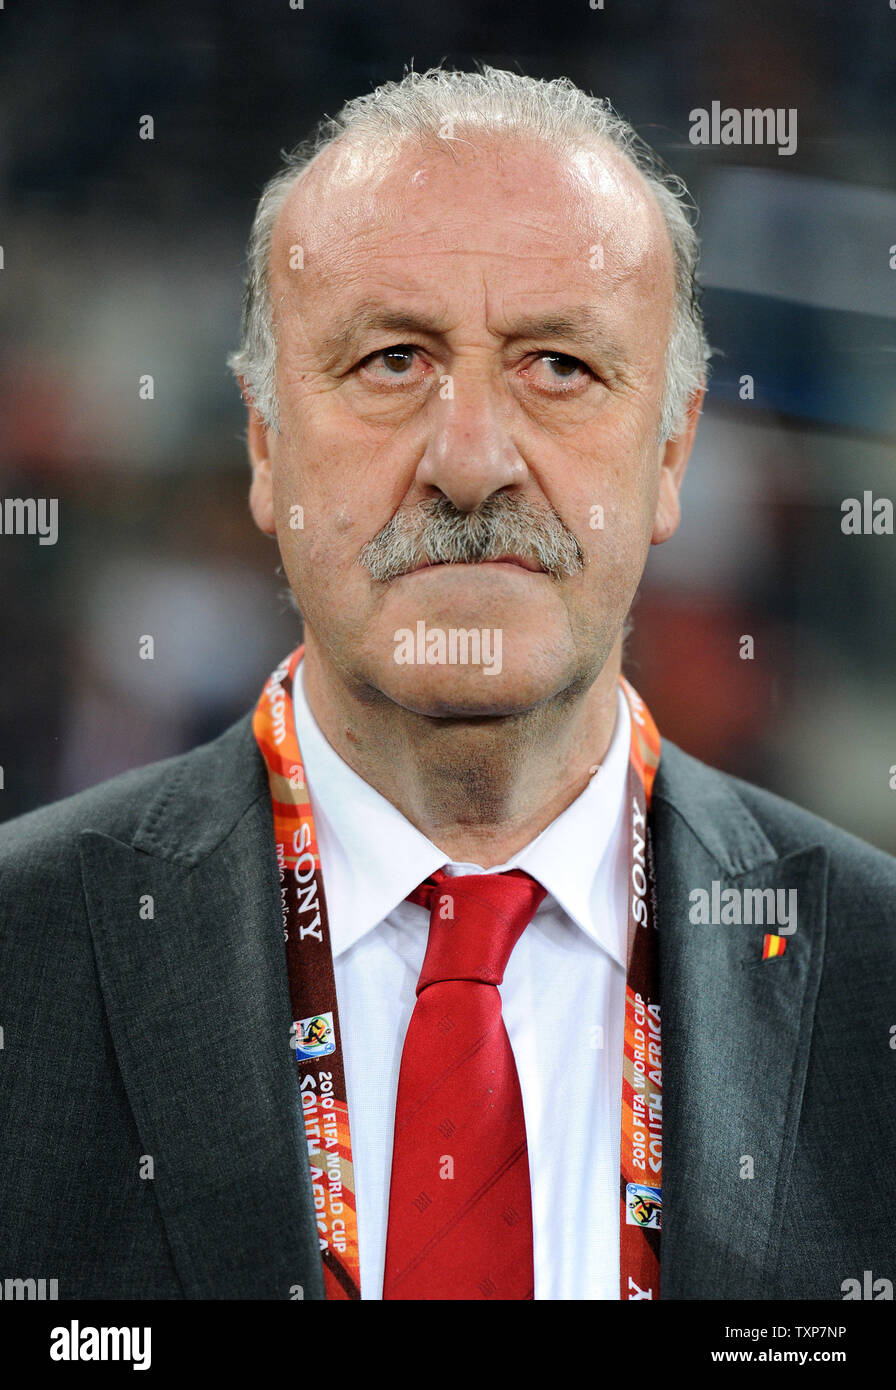 Spain manager Vicente Del Bosque during the FIFA World Cup Semi Final match at the Moses Mabhida Stadium in Durban, South Africa on July 7, 2010. UPI/Chris Brunskill Stock Photo